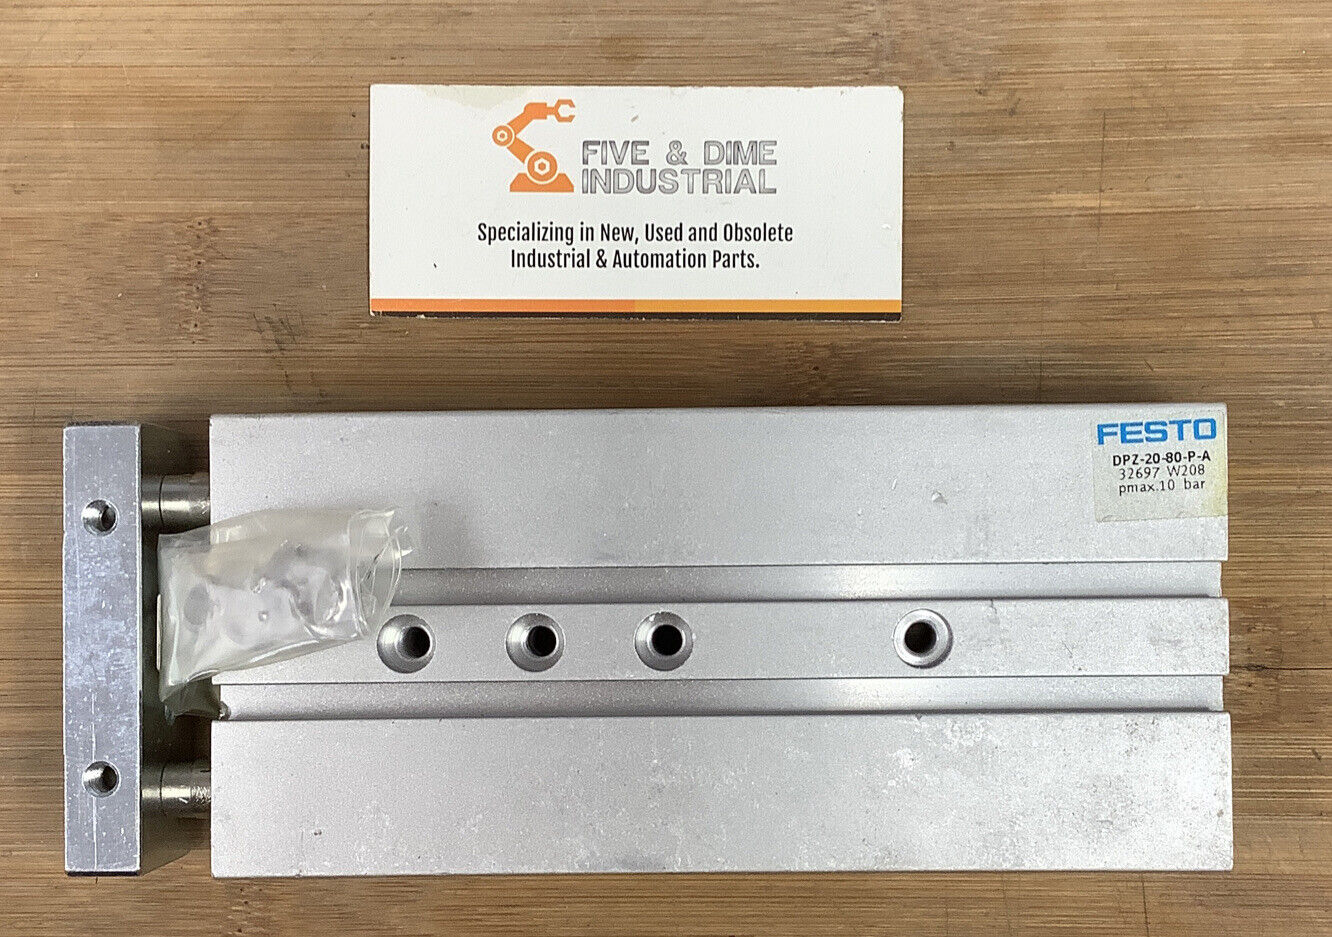 Festo DPZ-20-80-P-A New Linear Guided Pneumatic Cylinder (YE141)